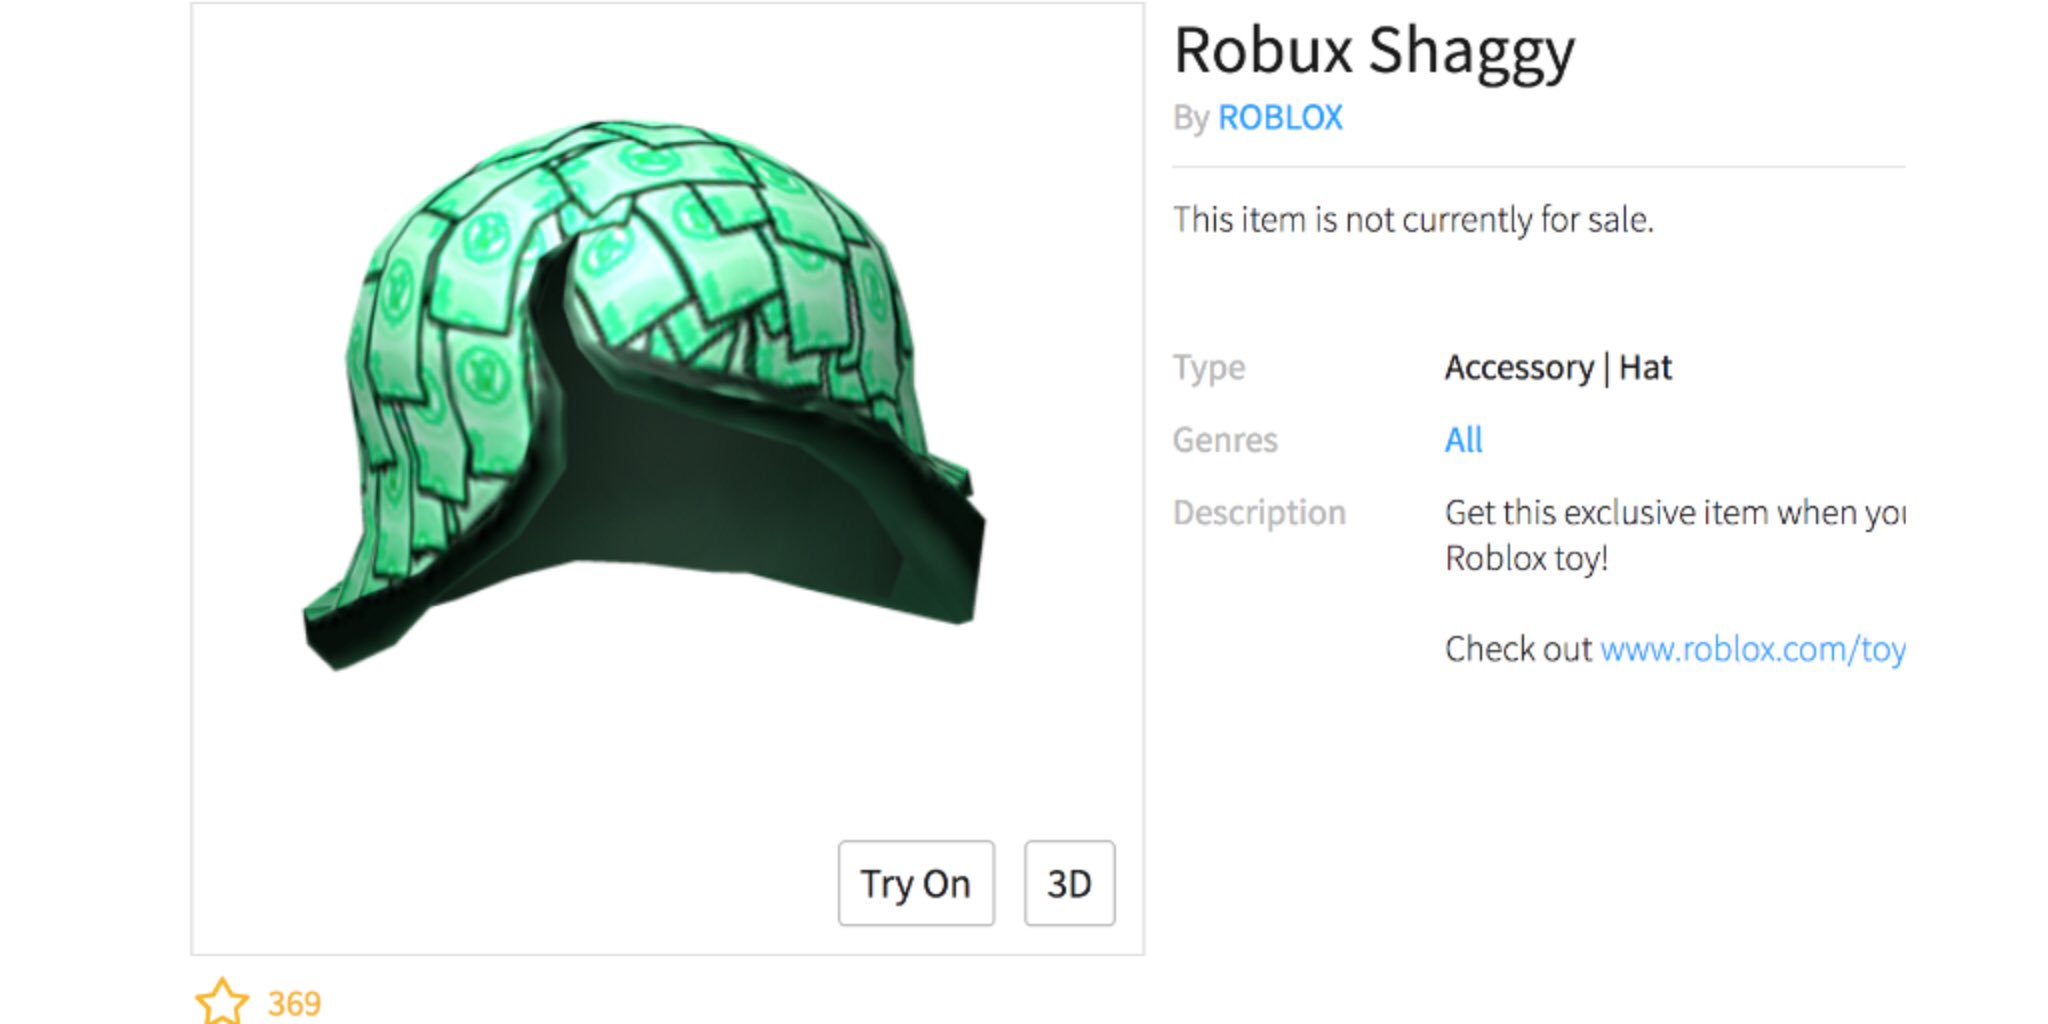 Lily On Twitter Looks Like The Robux Shaggy Is In An Upcoming Core Pack Or Playset Or Maybe A New Chaser It S Not In The Blind Boxes Cause No One Has It - how to get robux shaggy